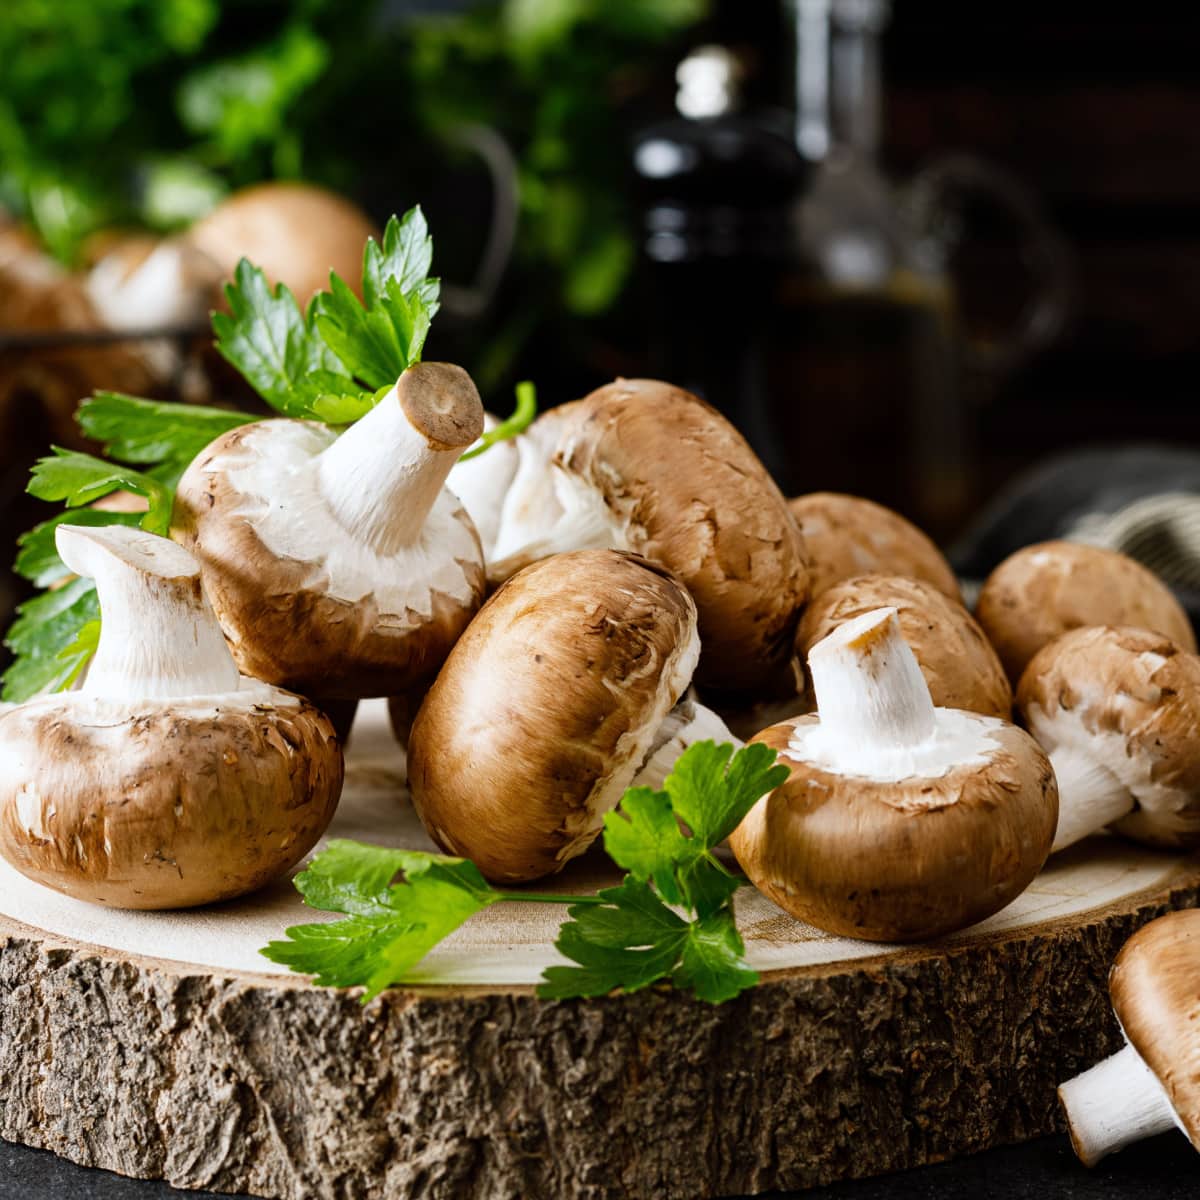 Bunch of Mushrooms with Celery Leaves on a Wooden Cutting Board